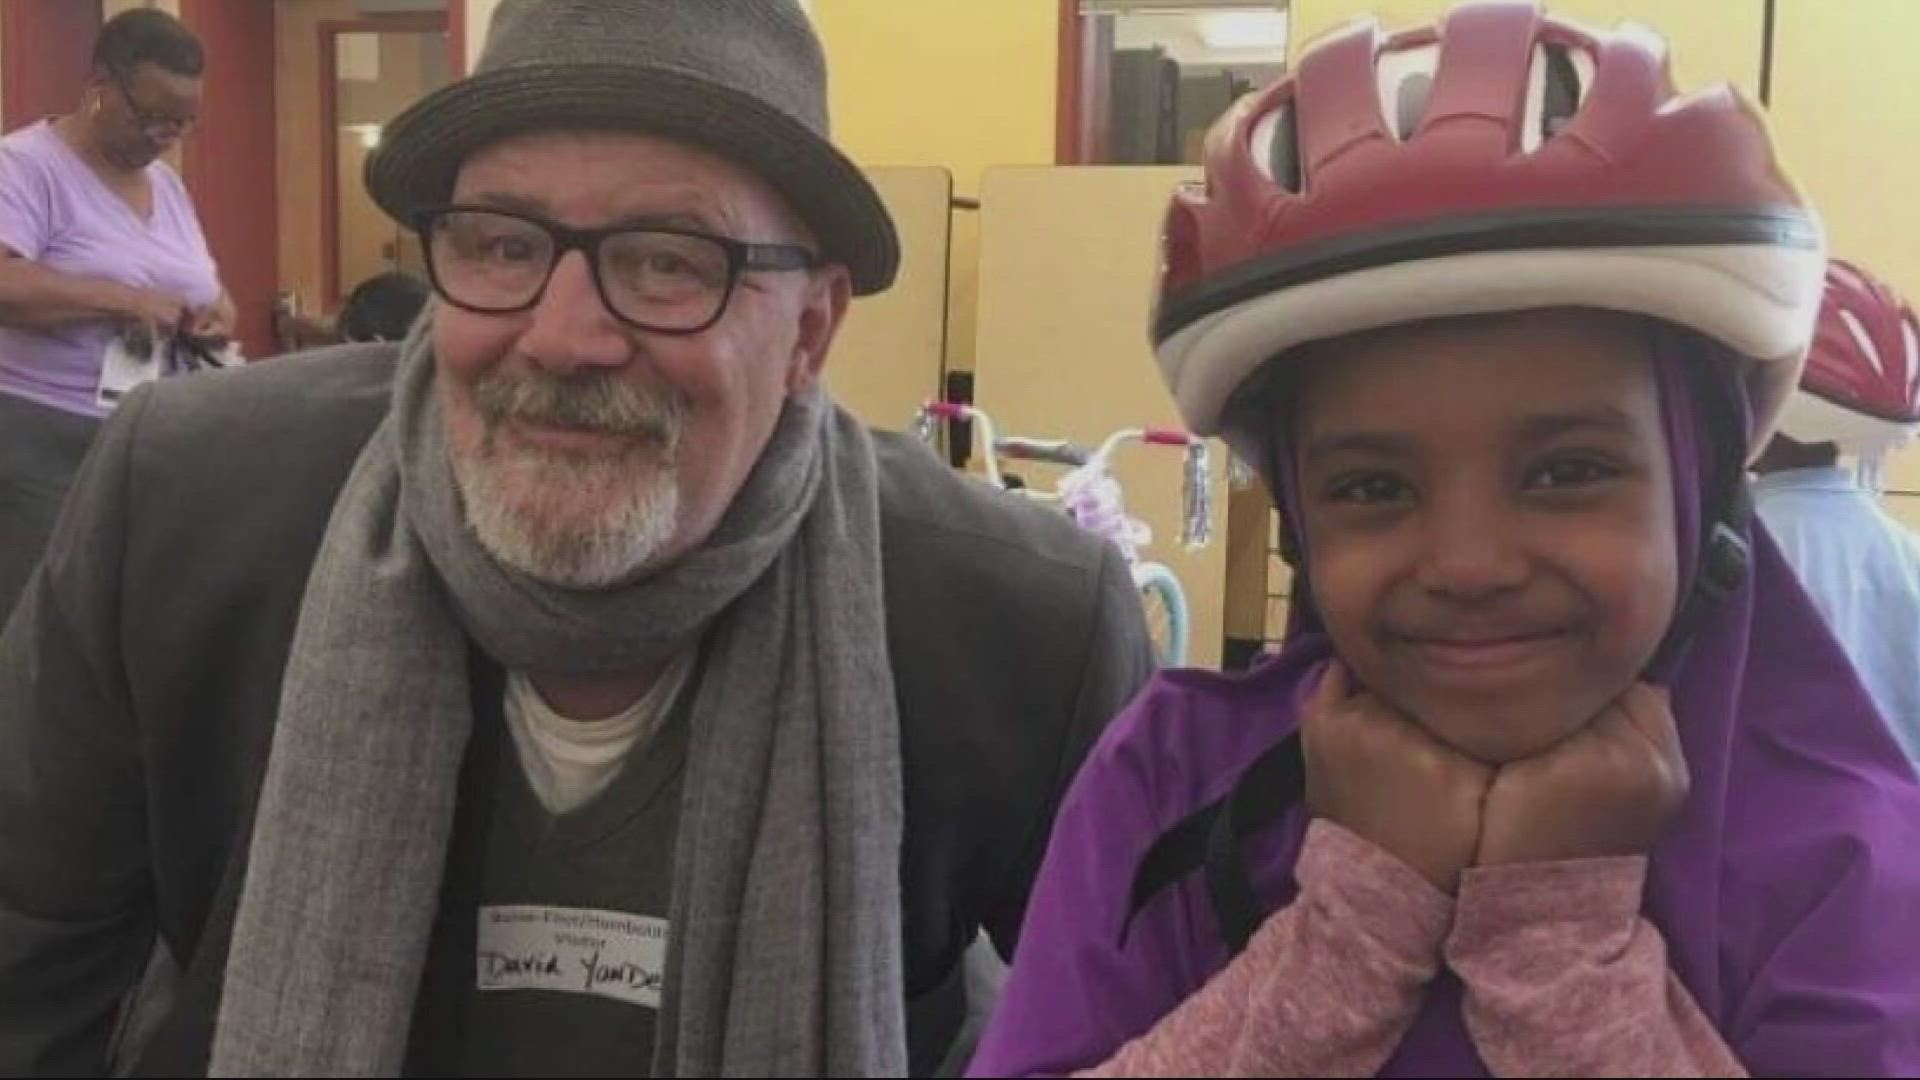 A program that gives bicycles to low-income families has the funds but is struggling to find in-stock bikes to buy that they can deliver to kids.